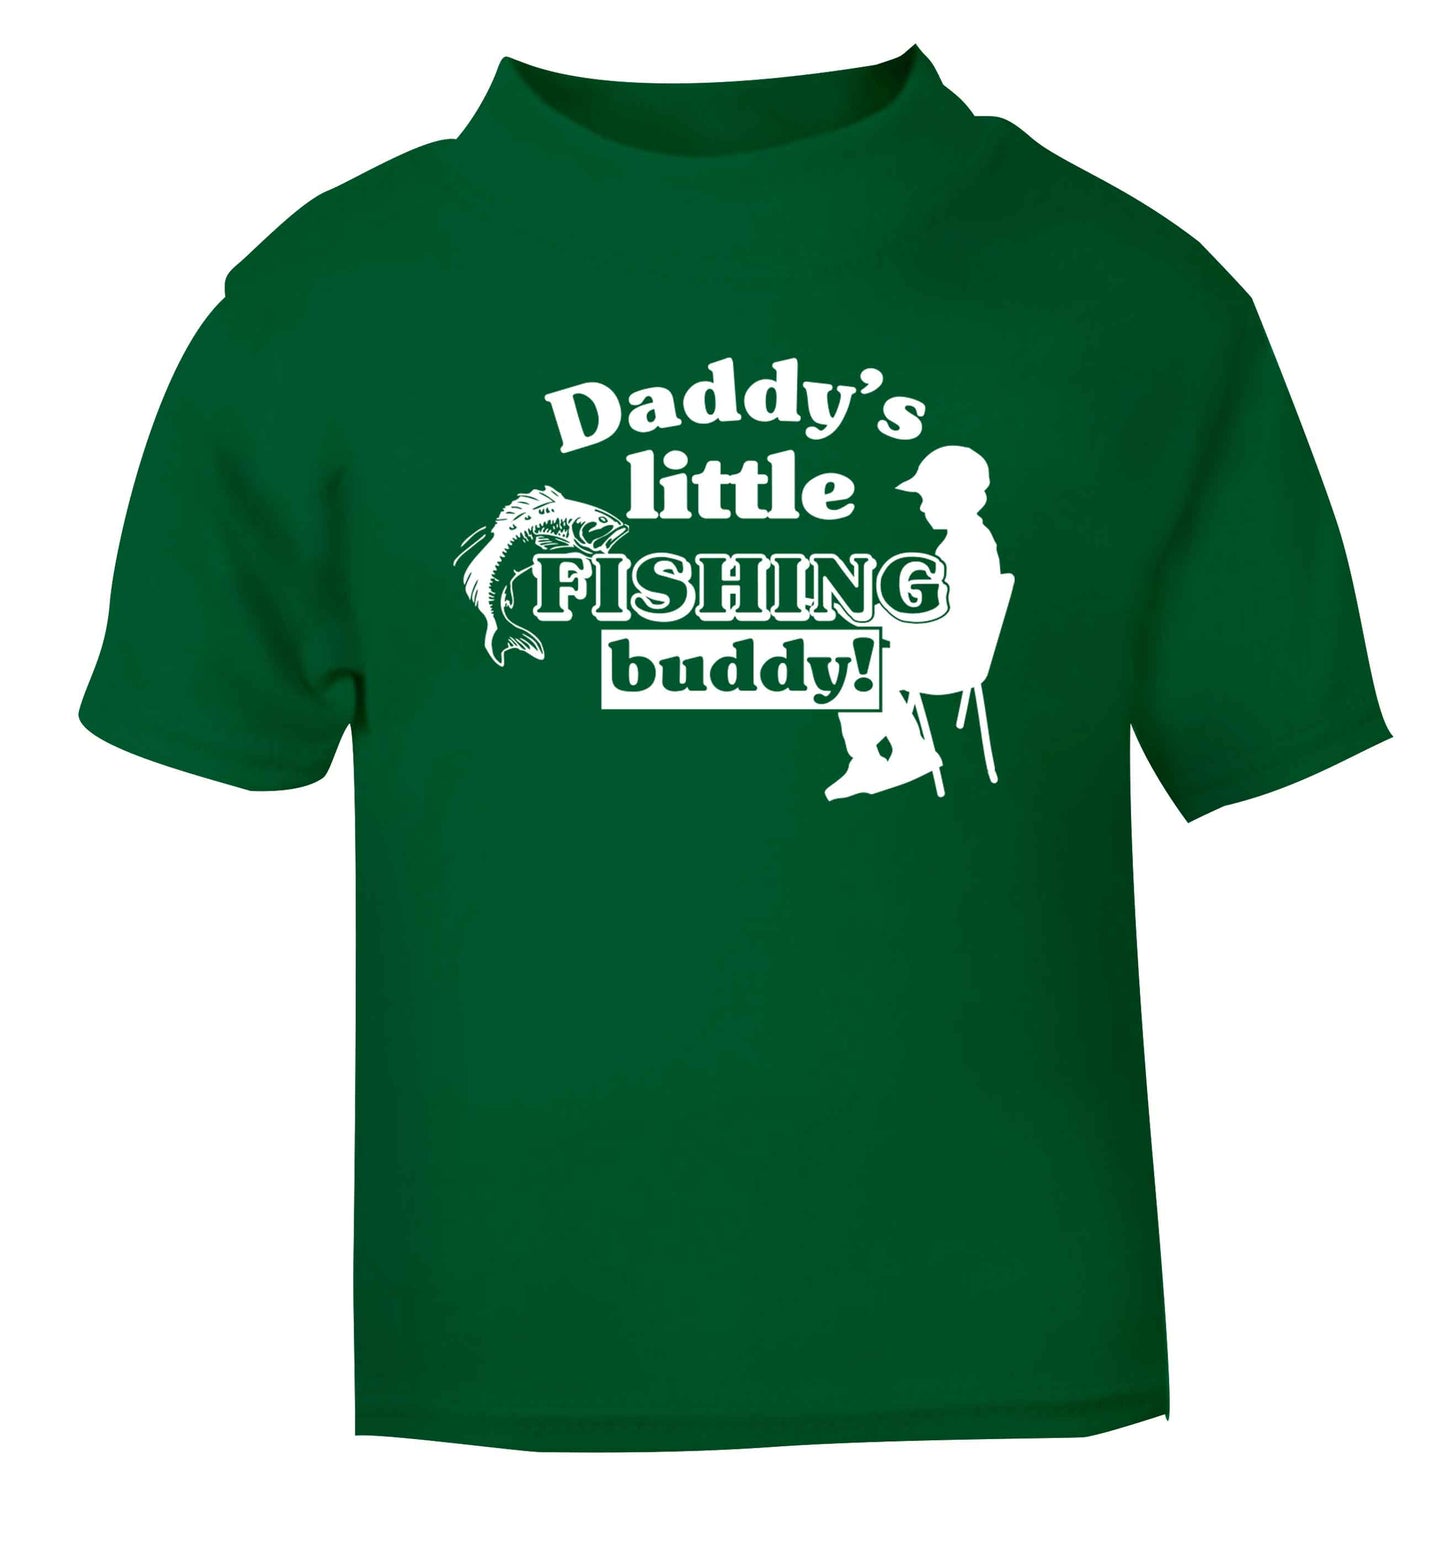 Daddy's little fishing buddy green Baby Toddler Tshirt 2 Years